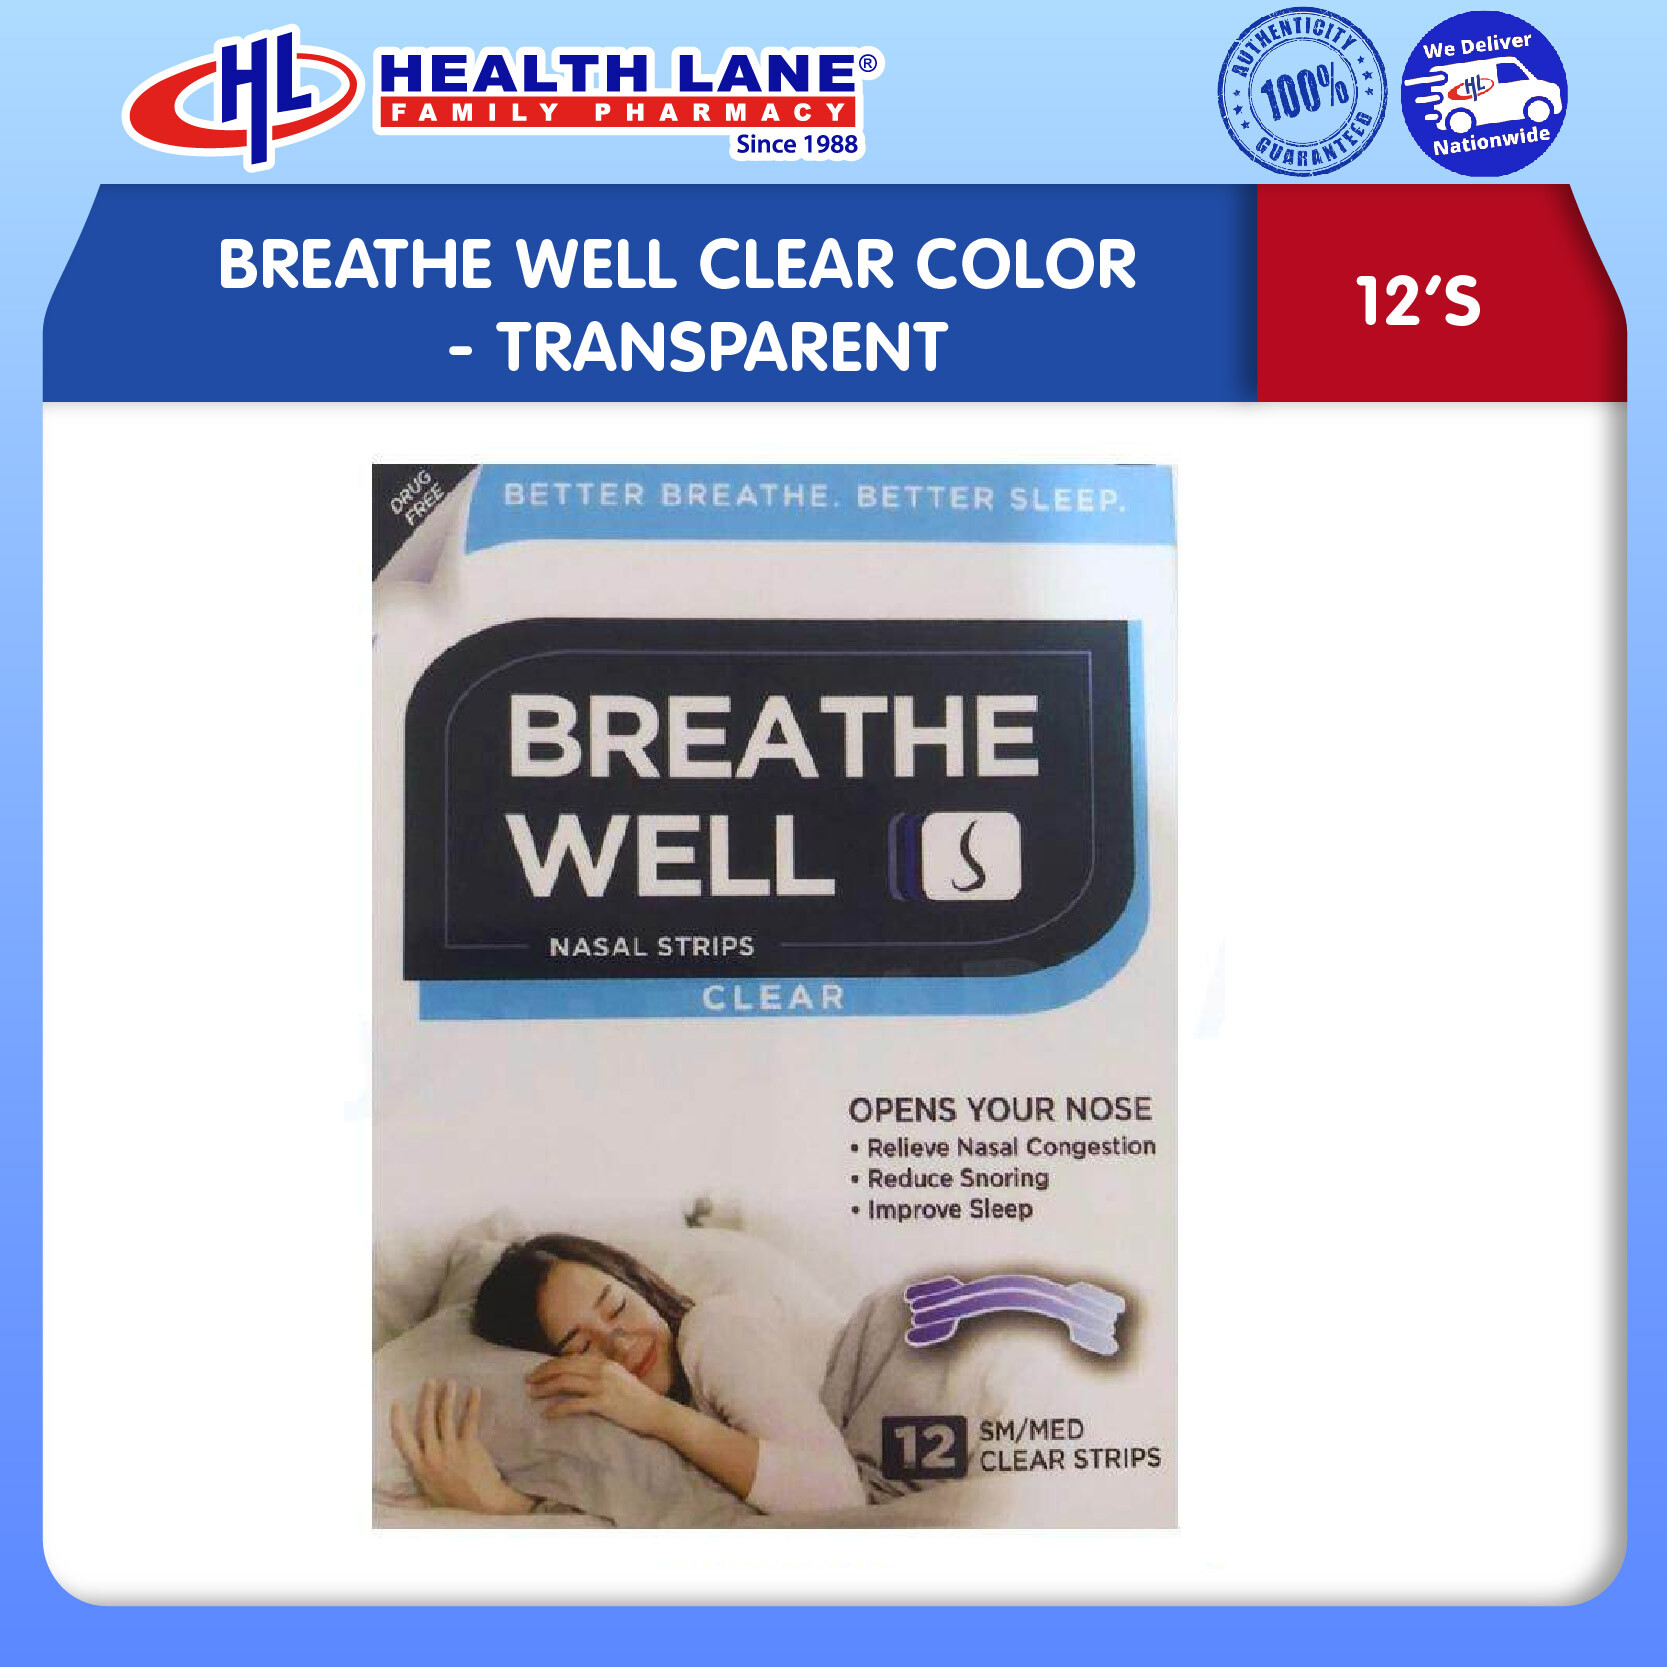 BREATHE WELL CLEAR COLOR (12'S) - TRANSPARENT 